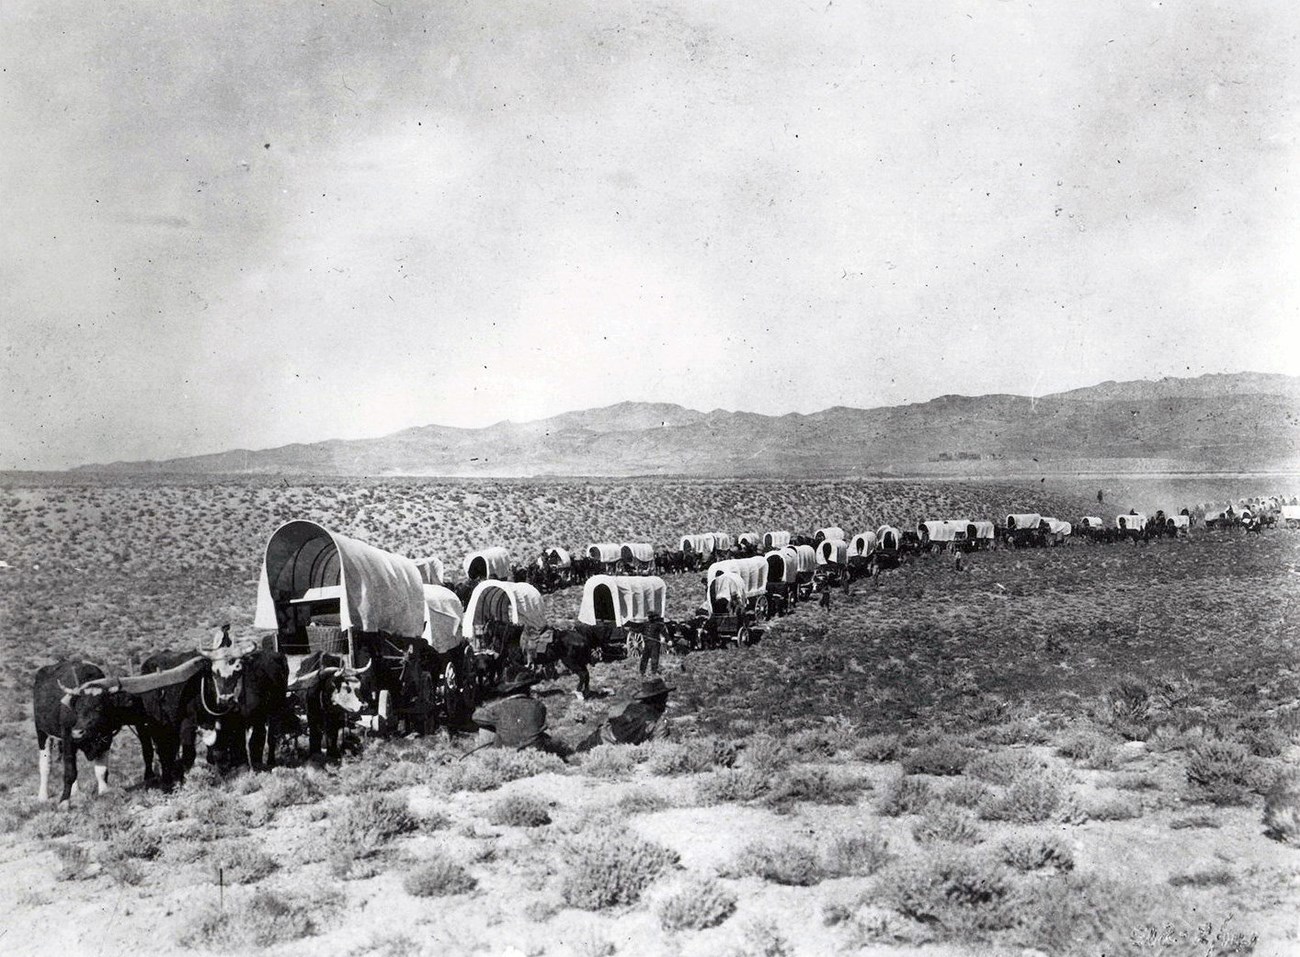 Two long parallel wagon trains of nearly 30 horse-drawn covered wagons meanders through desert, mountains in distance.